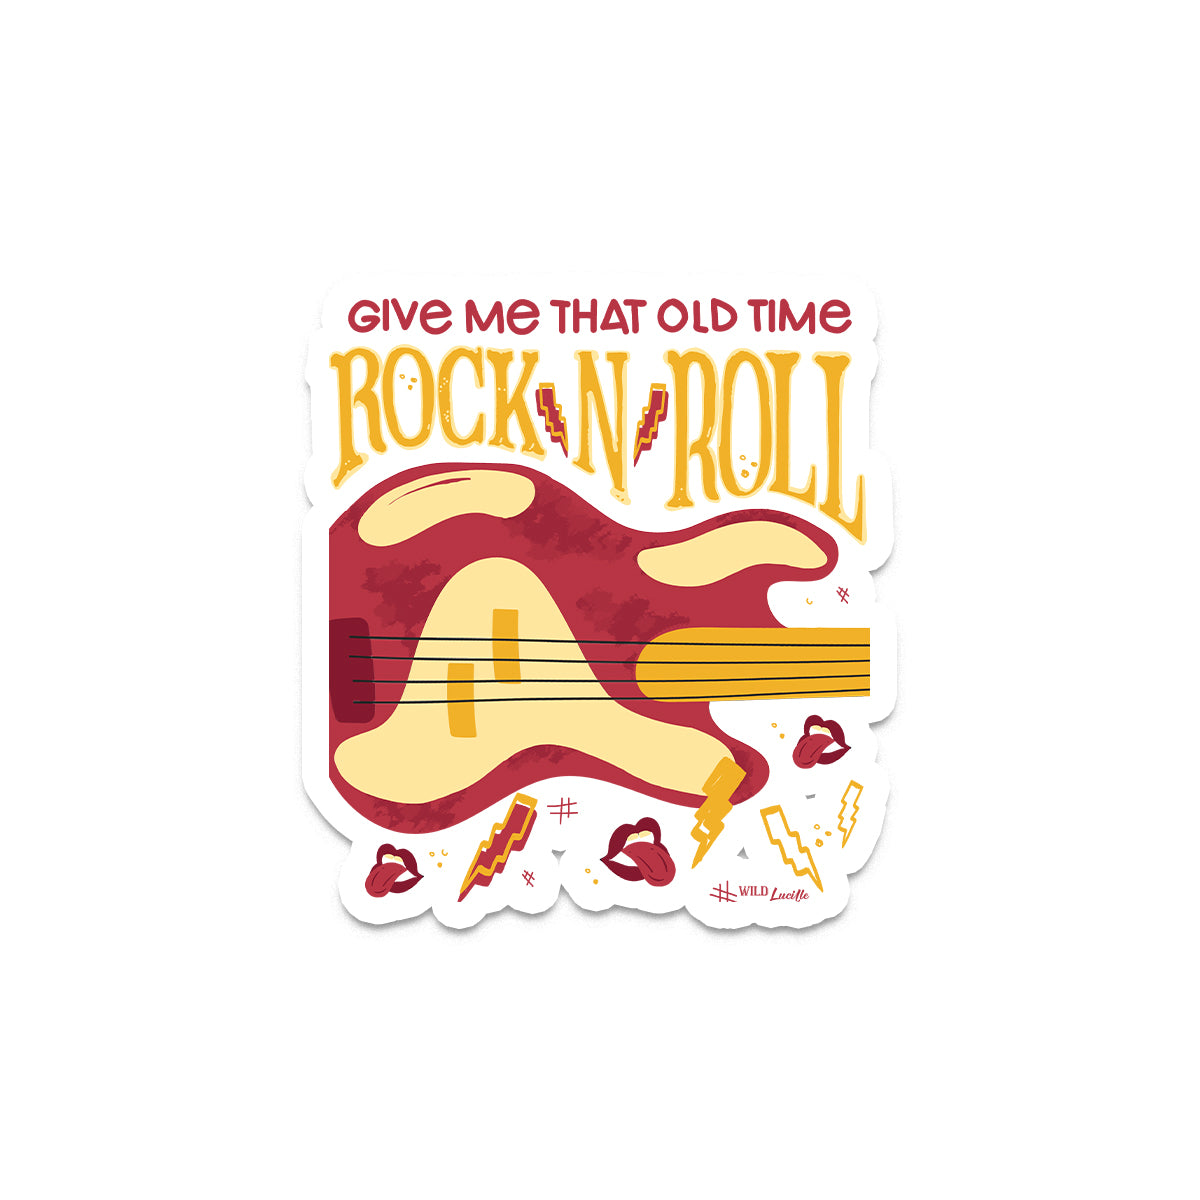 Give Me That Old Time Rock and Roll - Retro Rocker Vinyl Sticker Decals